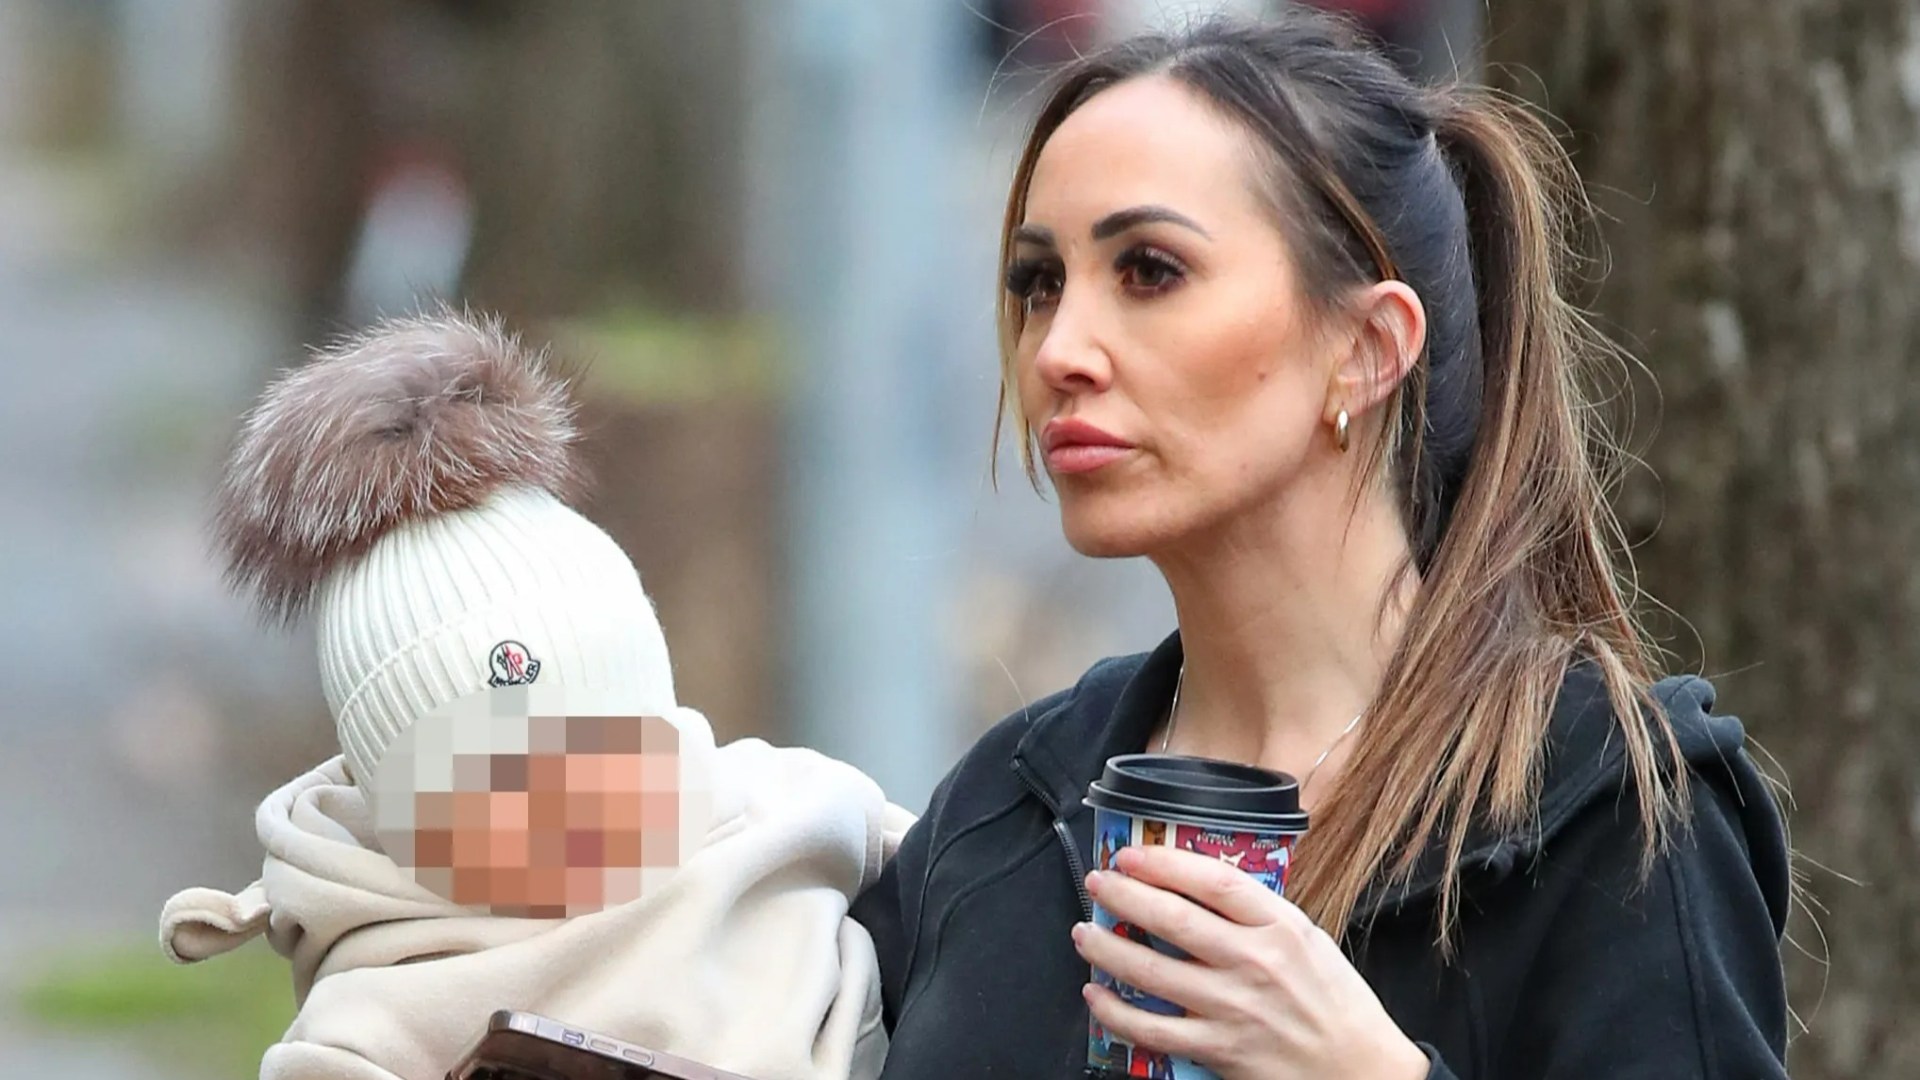 Lauryn Goodman seen for first time after it's revealed Kyle Walker fathered model's baby while married